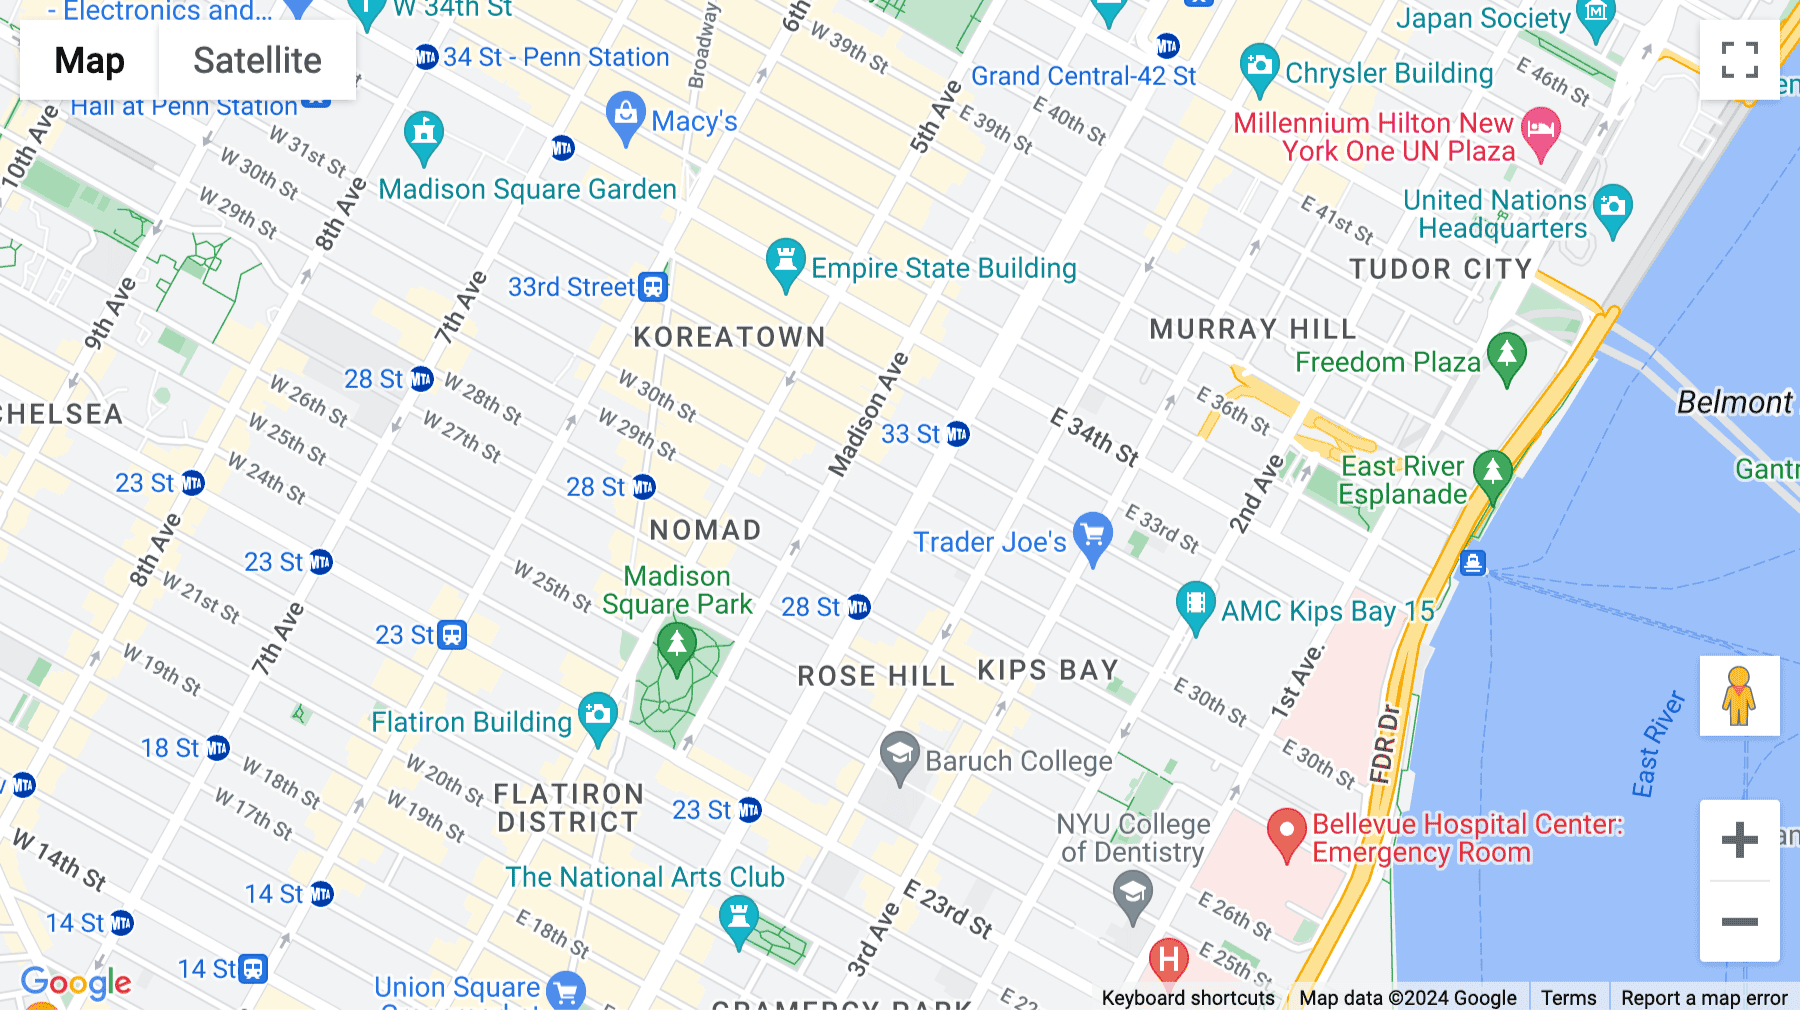 Click for interative map of 450 Park Avenue South, New York City